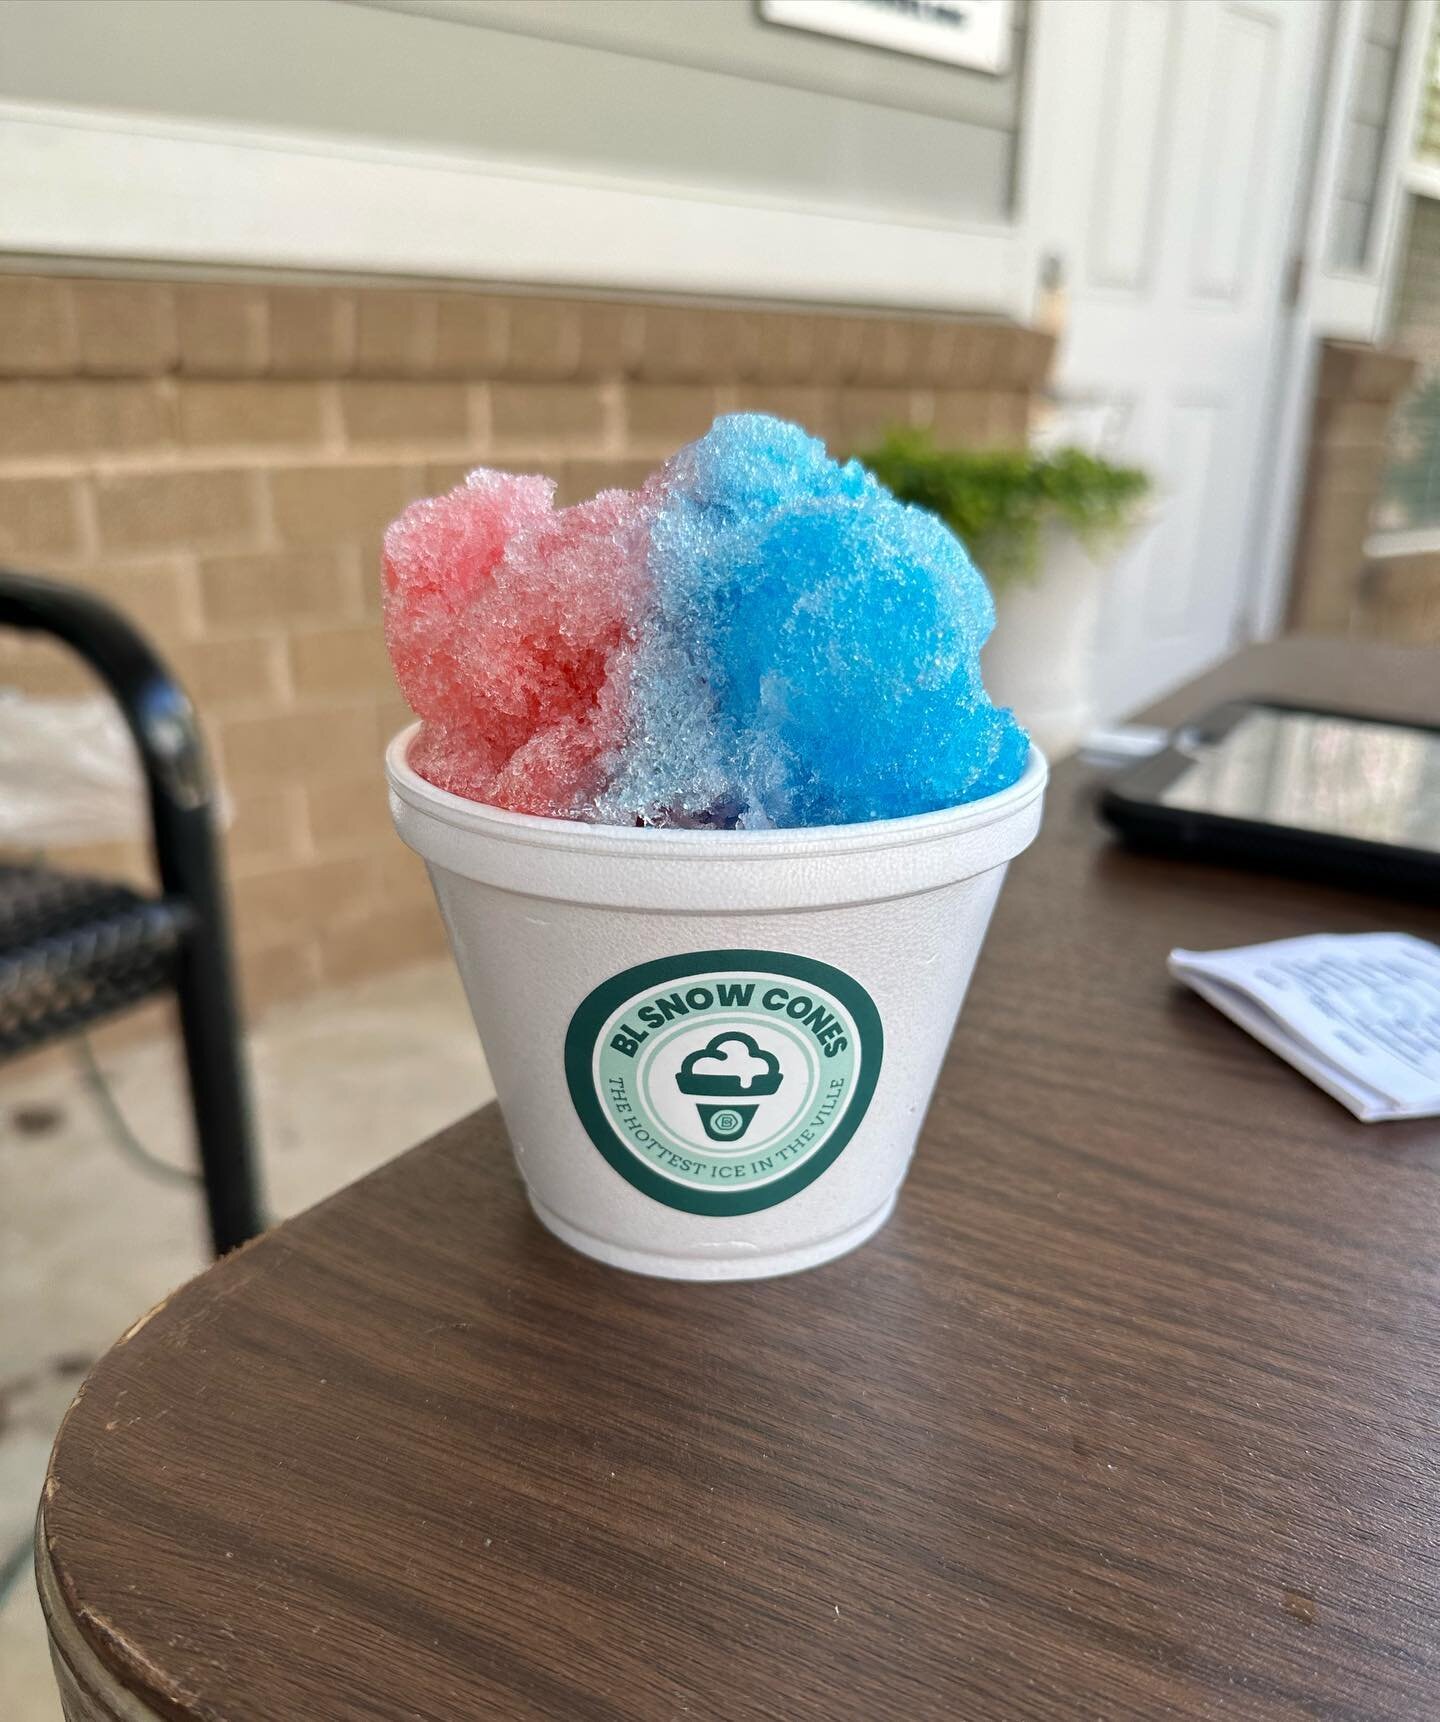 Snow cone lovers it&rsquo;s your lucky day🍧 We are back at it this week serving snow cones! 

Here is where to find us this week🎉:

Monday: Mitchell Road 5:30-7:30pm
Wednesday: PMP 4:00-7:00pm
Thursday: Holiday Ingram 3:00-4:30pm
Friday: Children's